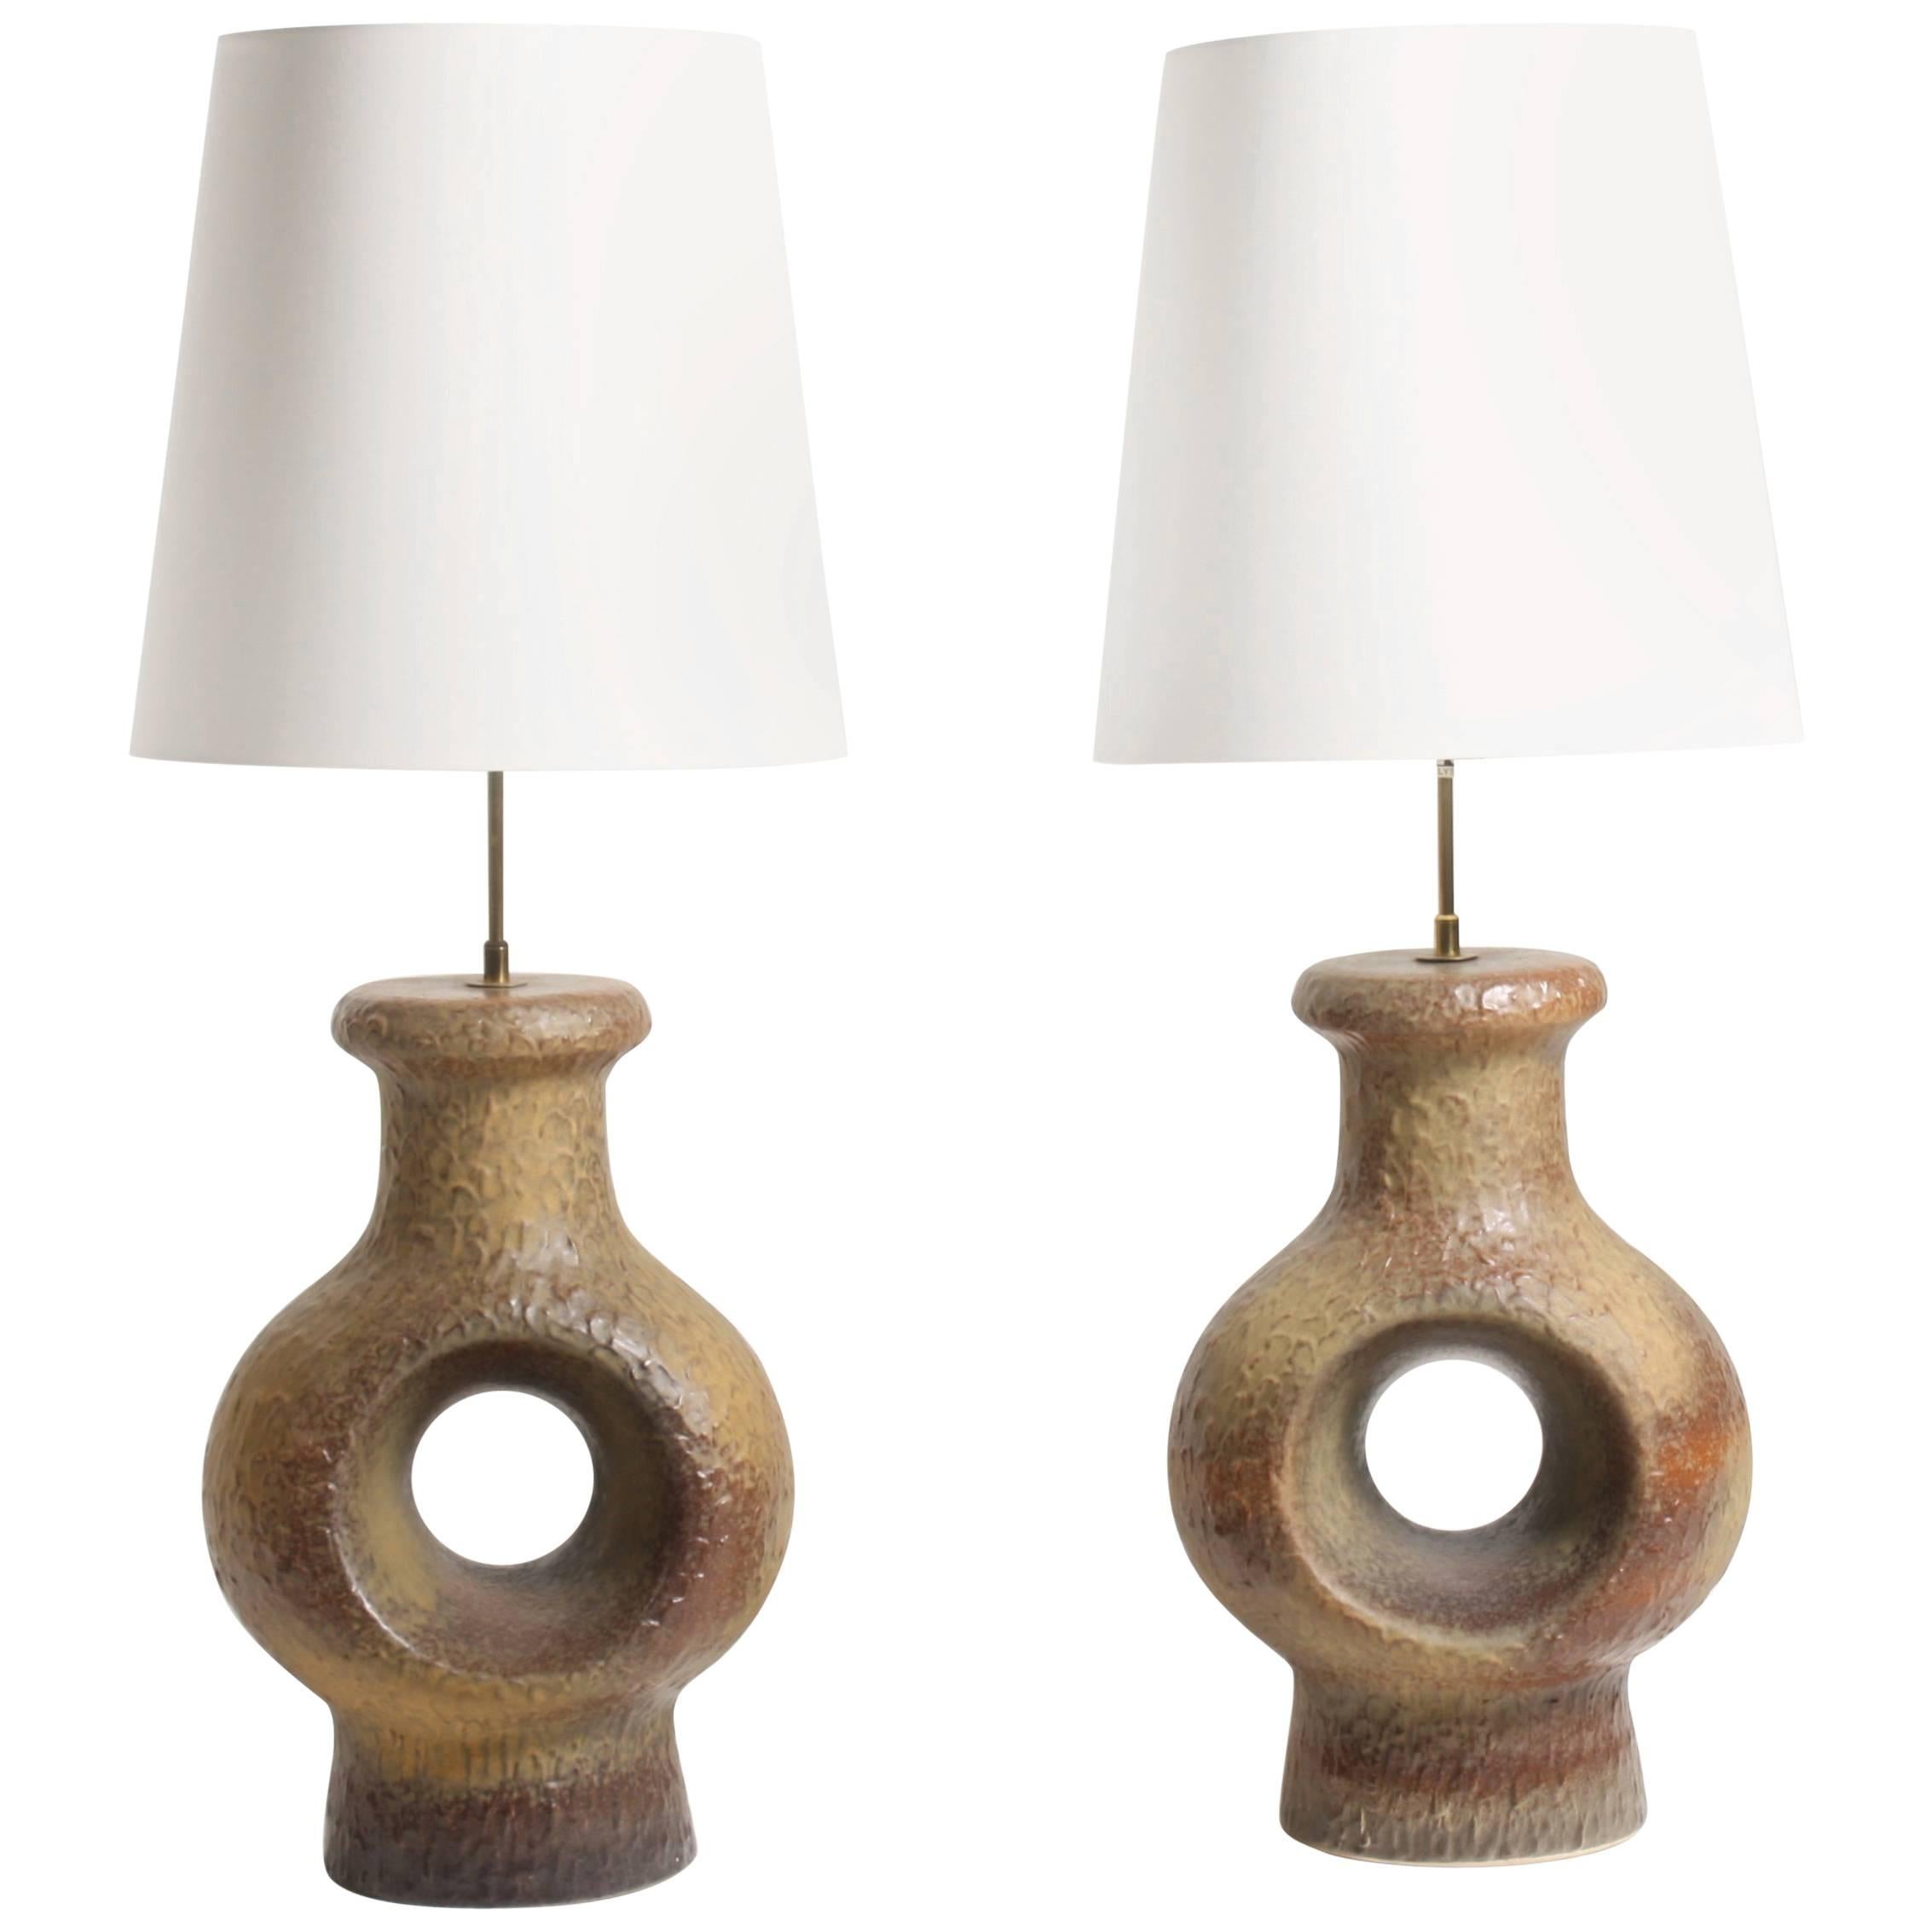 Pair of Artefact Table Lamps with Great Detailing